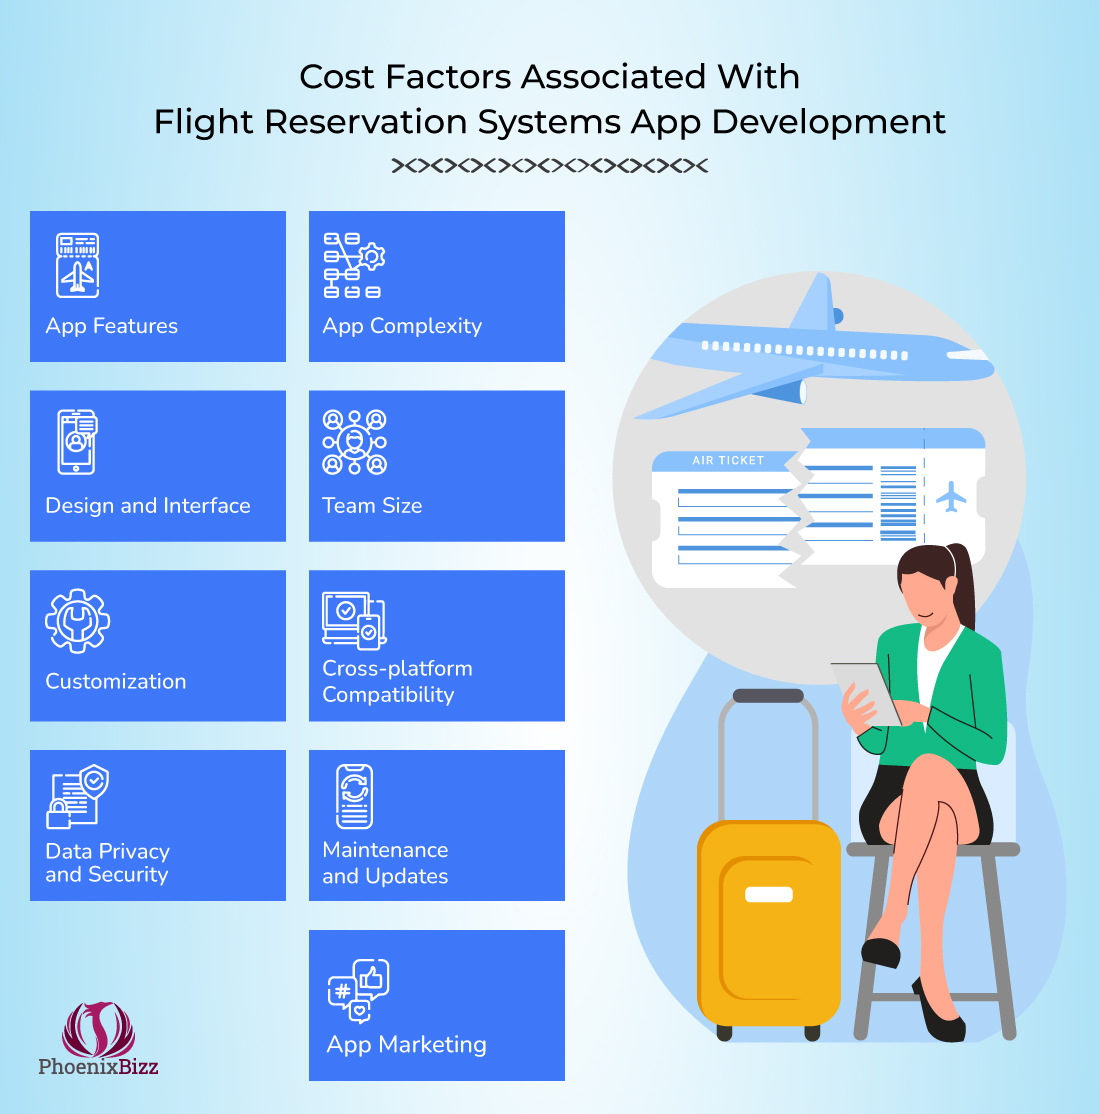 Cost factors associated with flight reservation systems app development